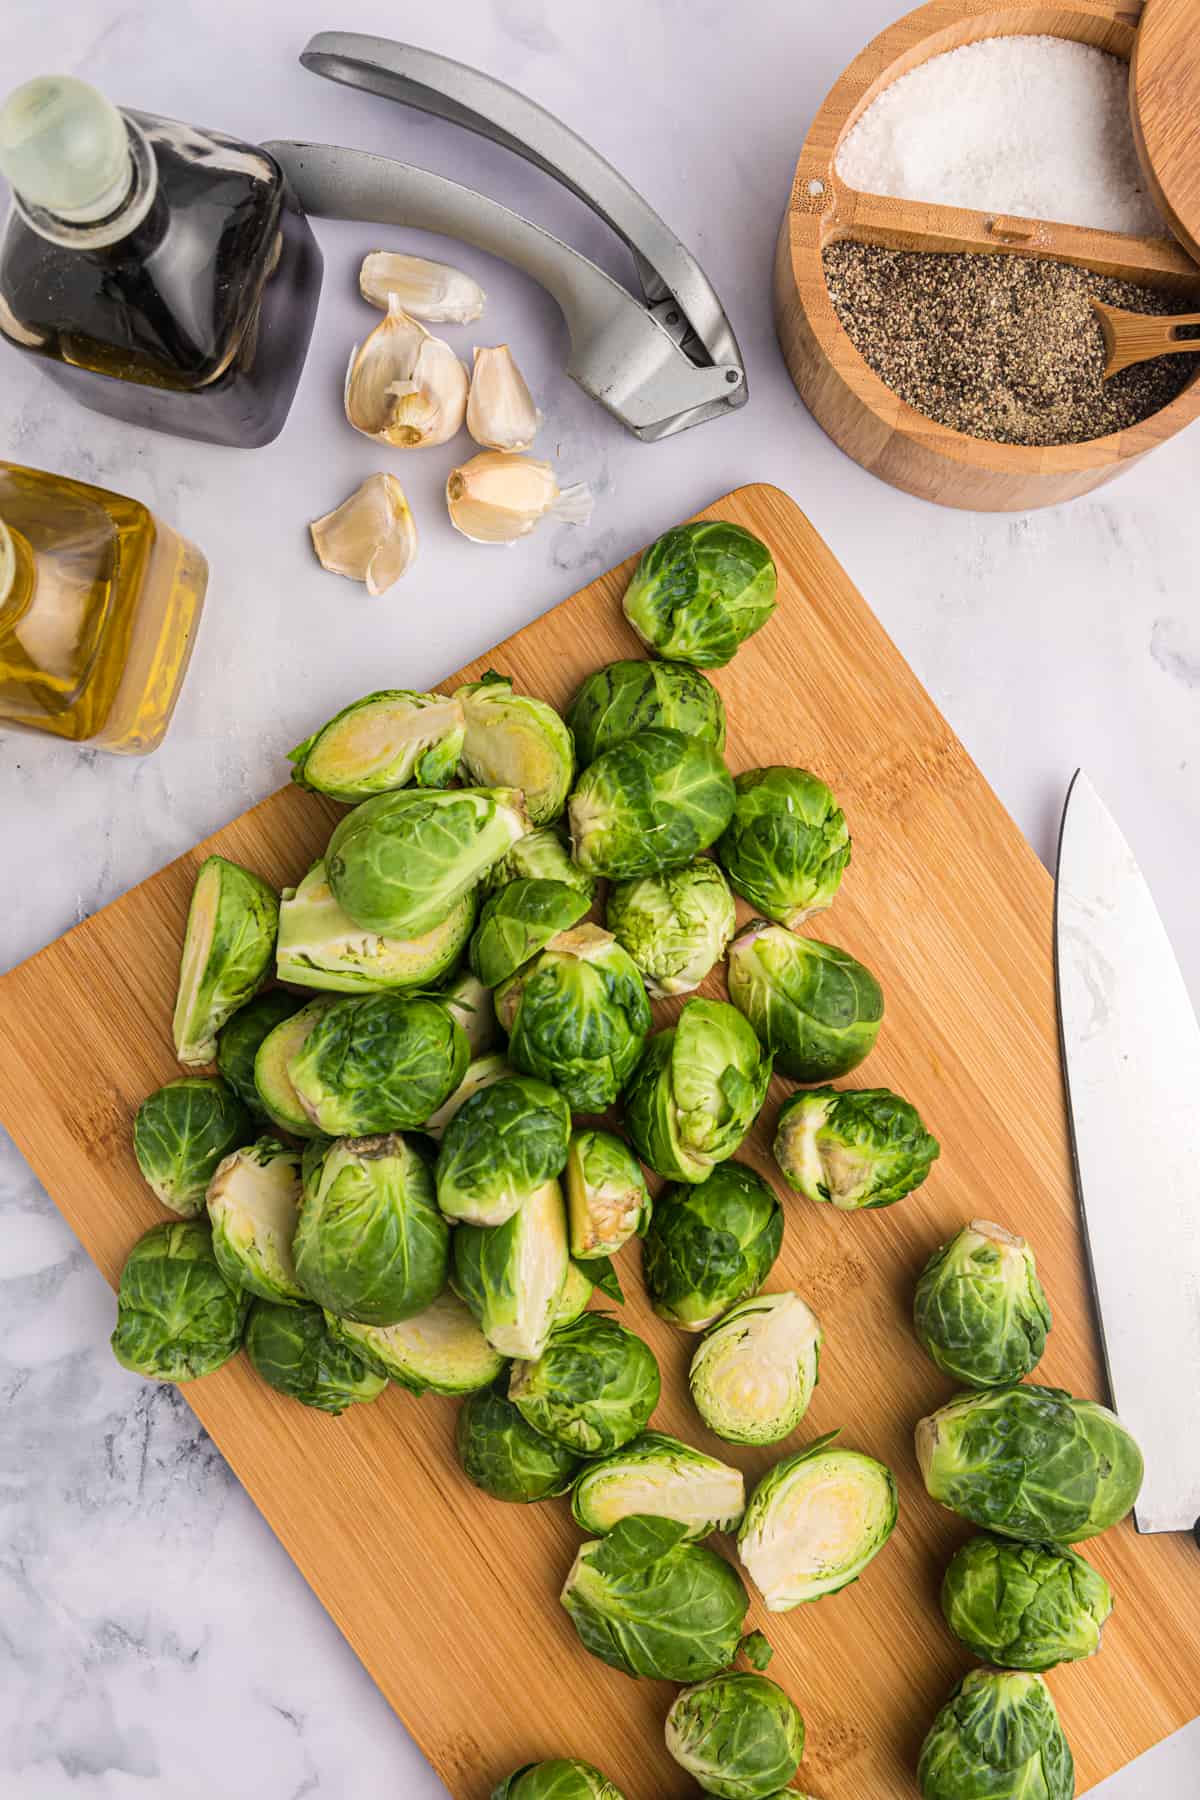 Brussels sprouts are being chopped on a wooden cutting board.